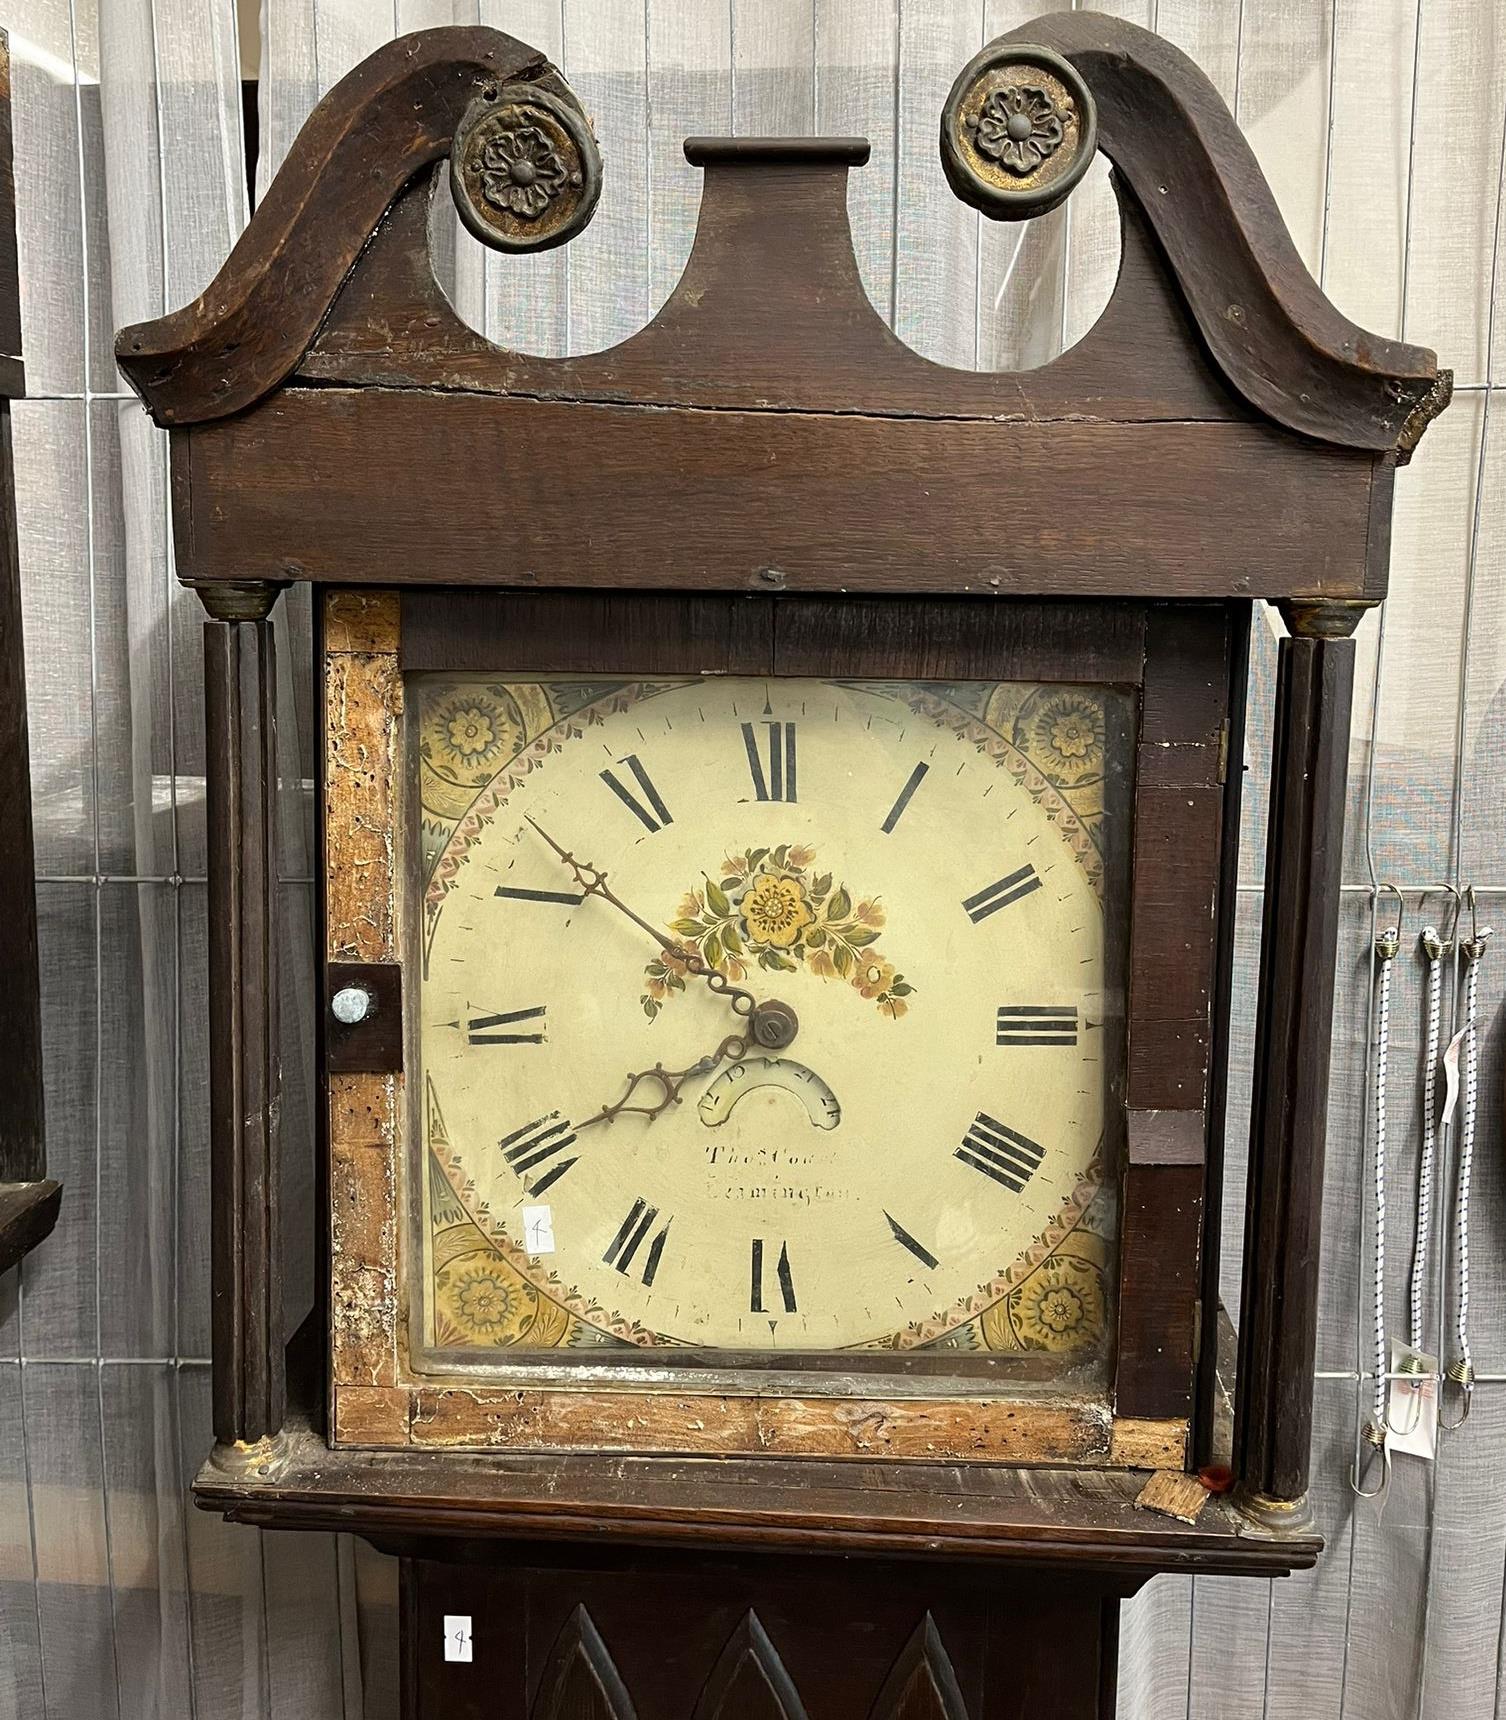 19th century 30 hour long case clock marked Thomas Court, Limington. Distressed condition. (B.P. 21%